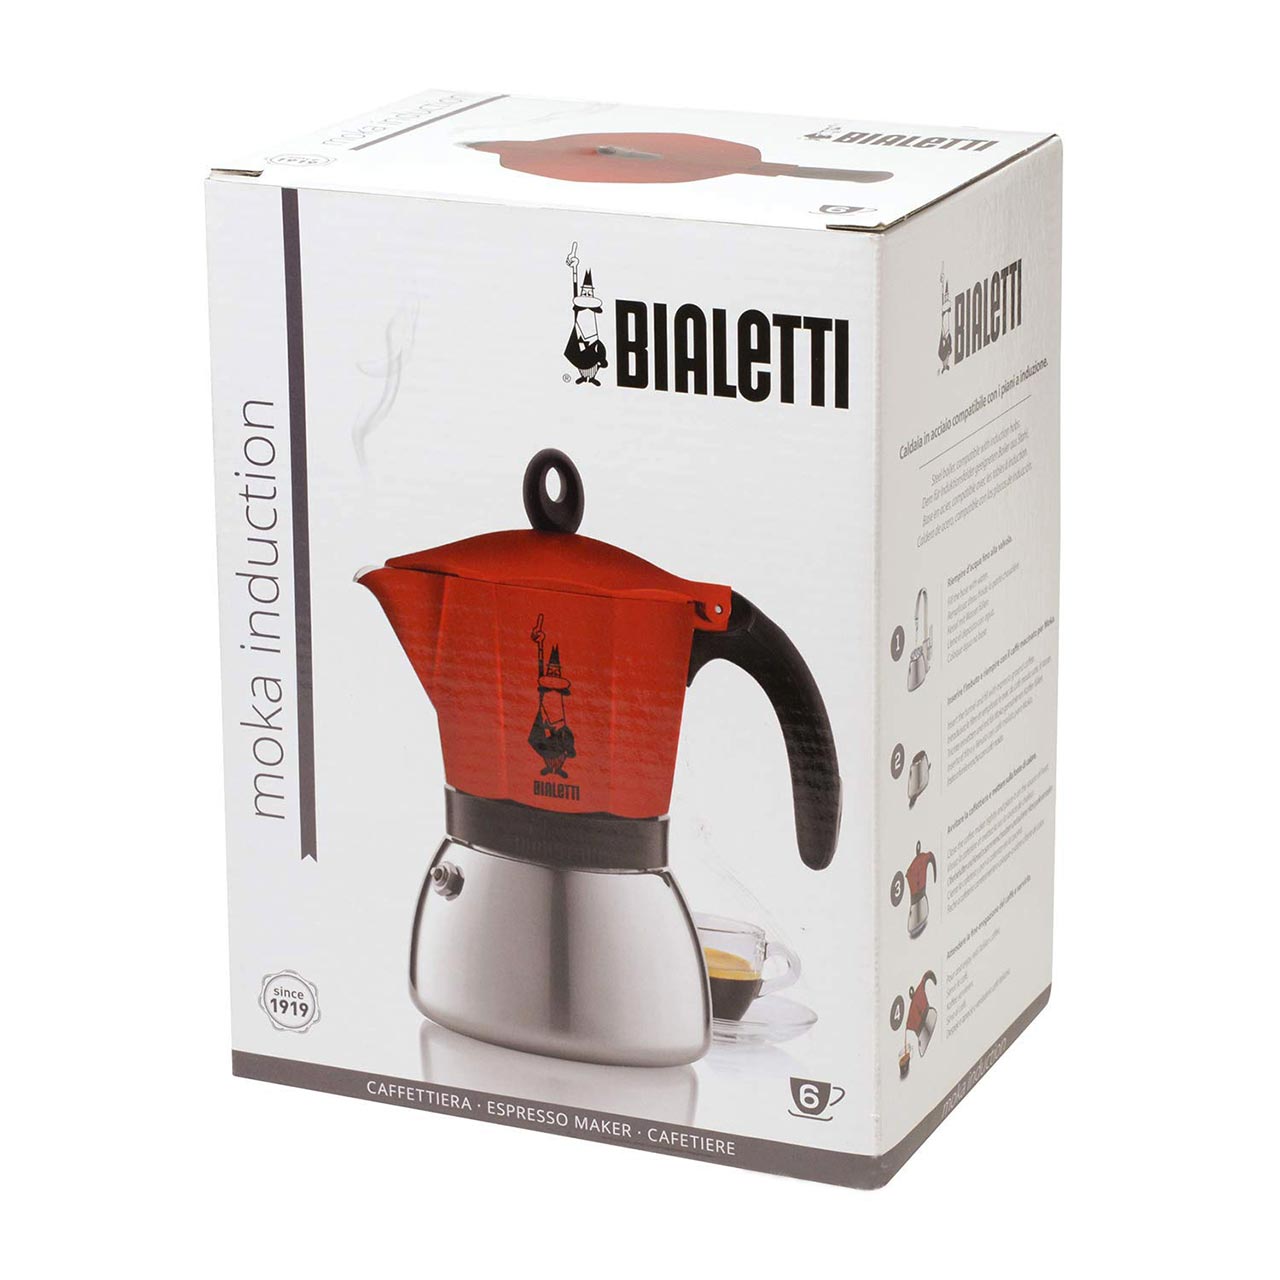 https://cdn11.bigcommerce.com/s-2plzc/images/stencil/original/products/2178/33016/Bialetti-moka-induction-red-6-cup-CM822-2-1-op__50467.1634687810.jpg?c=2